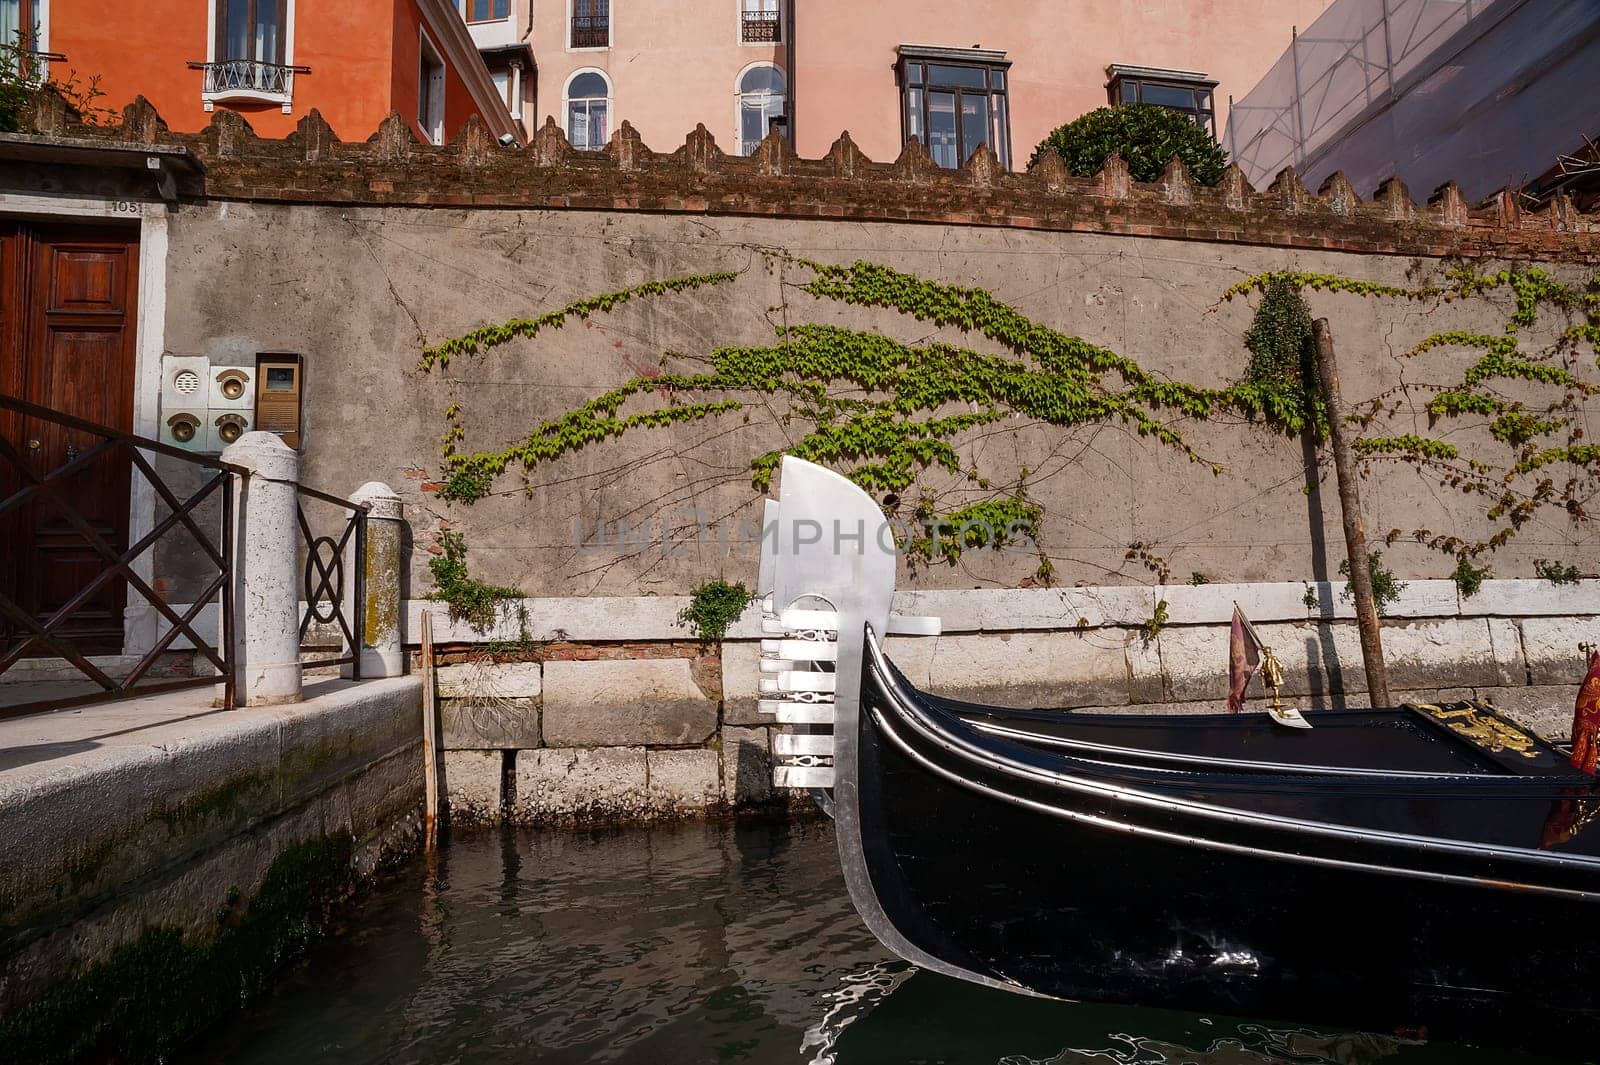 The metal bow (ferro) of the gondola of venice by Giamplume